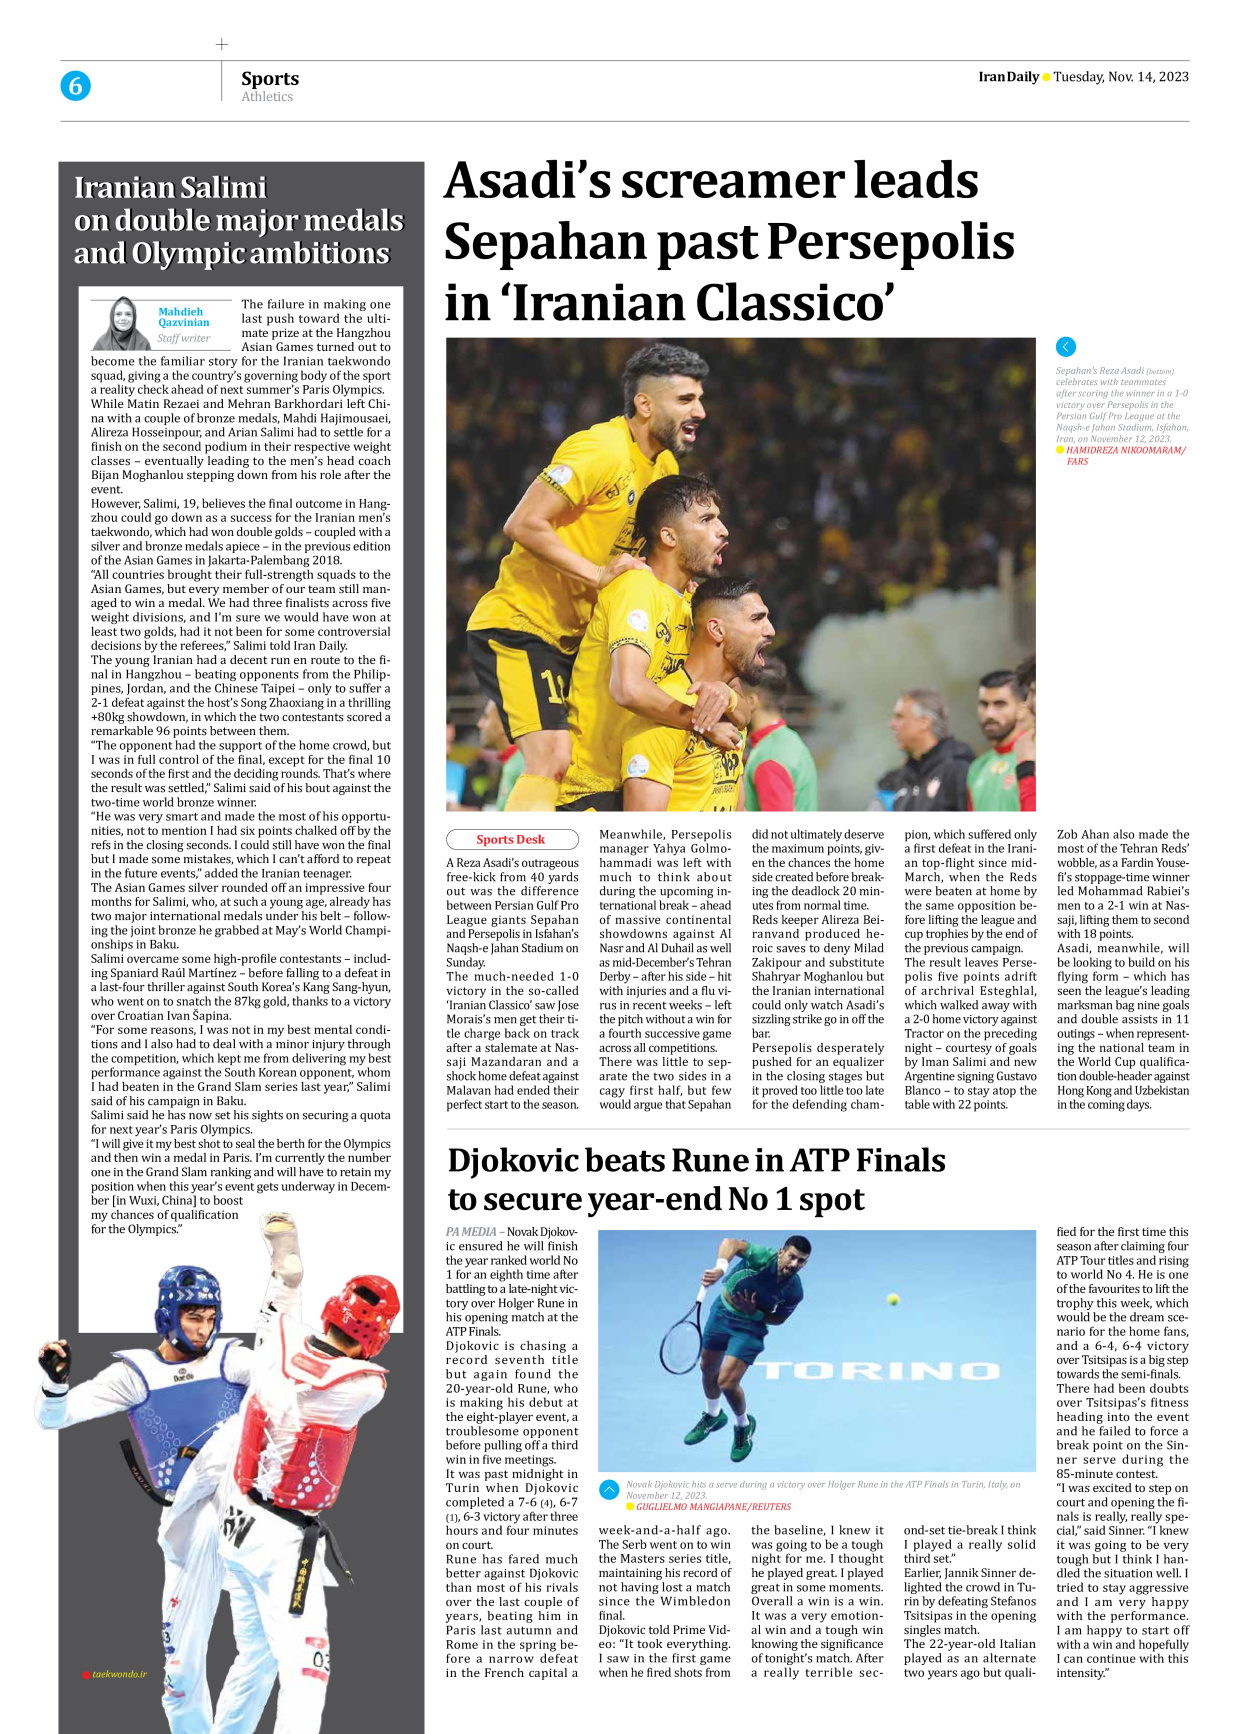 Iran Daily - Number Seven Thousand Four Hundred and Thirty Four - 14 November 2023 - Page 6